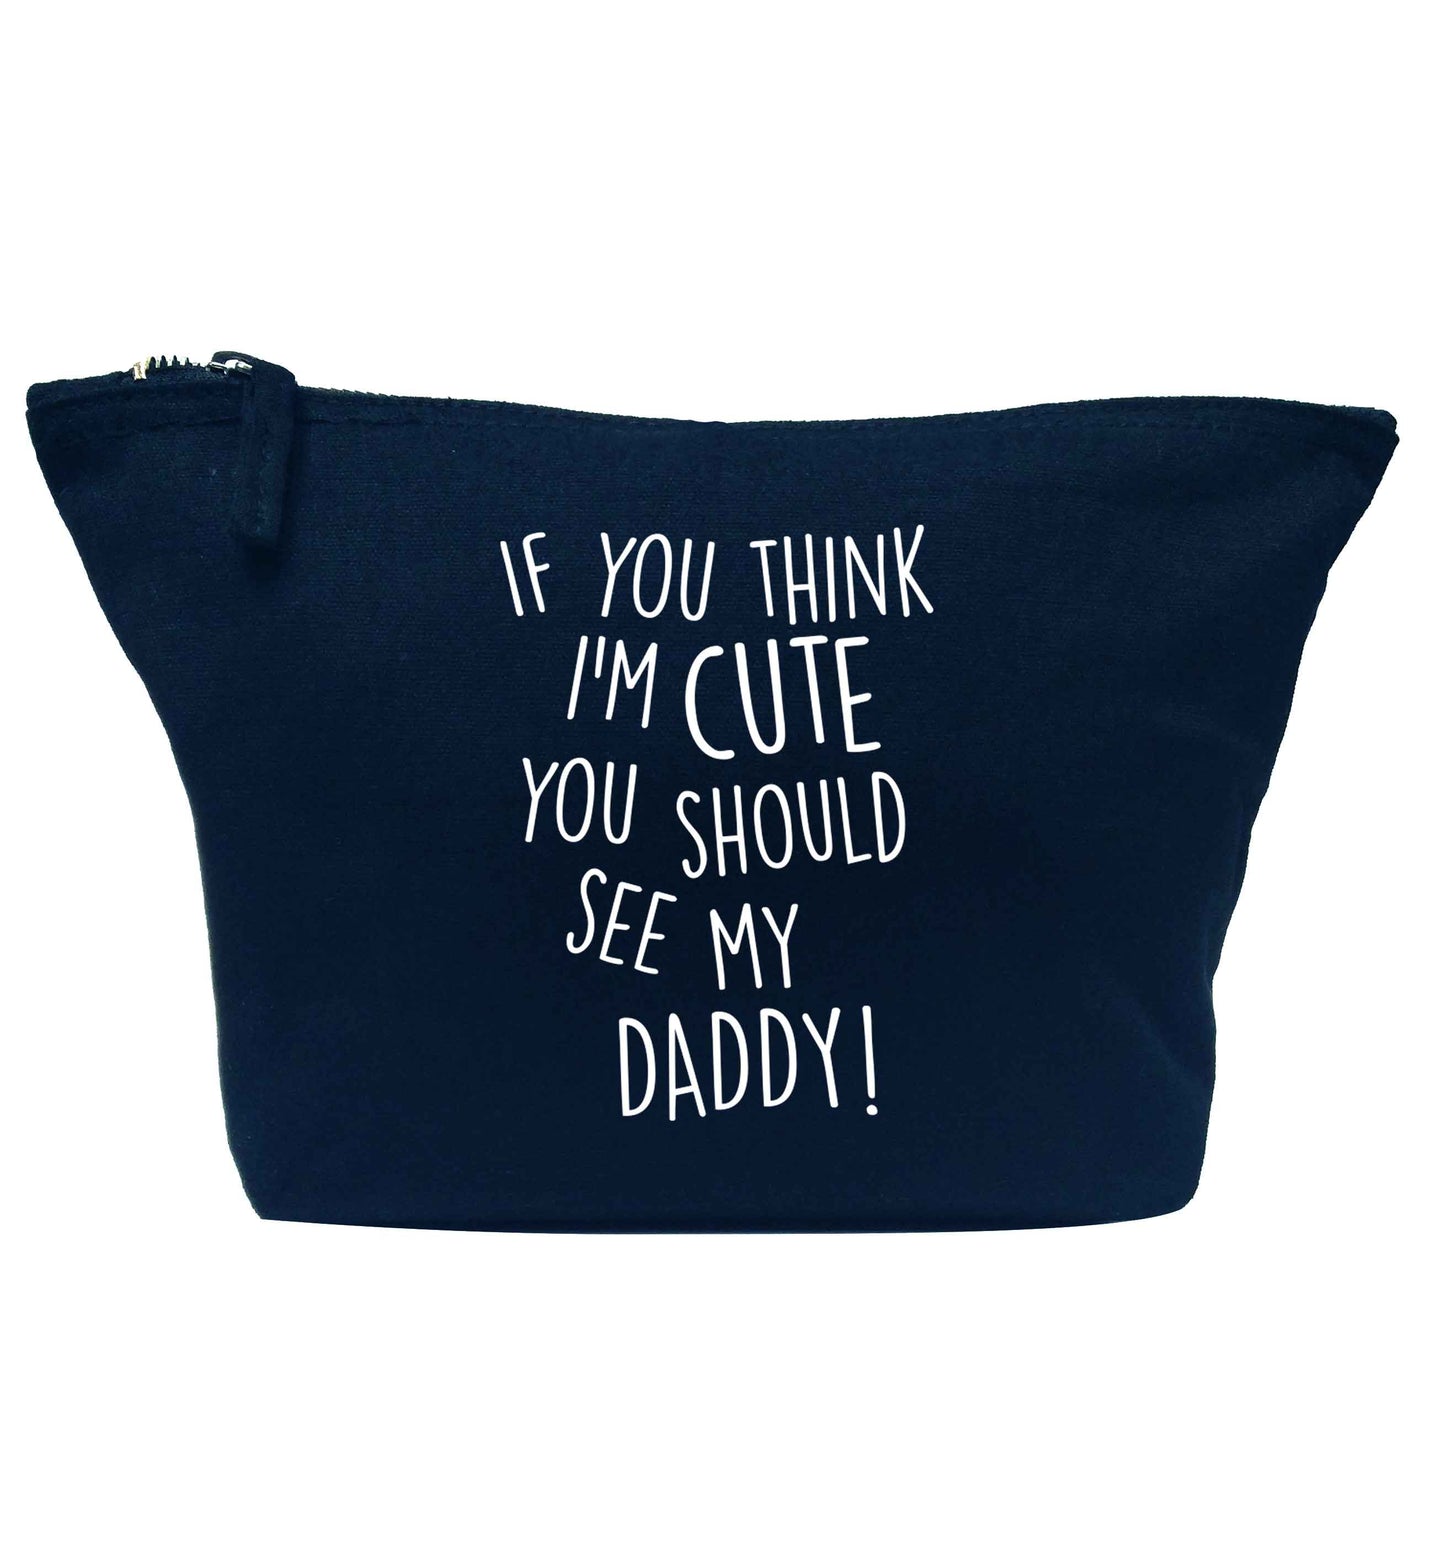 If you think I'm cute you should see my daddy navy makeup bag